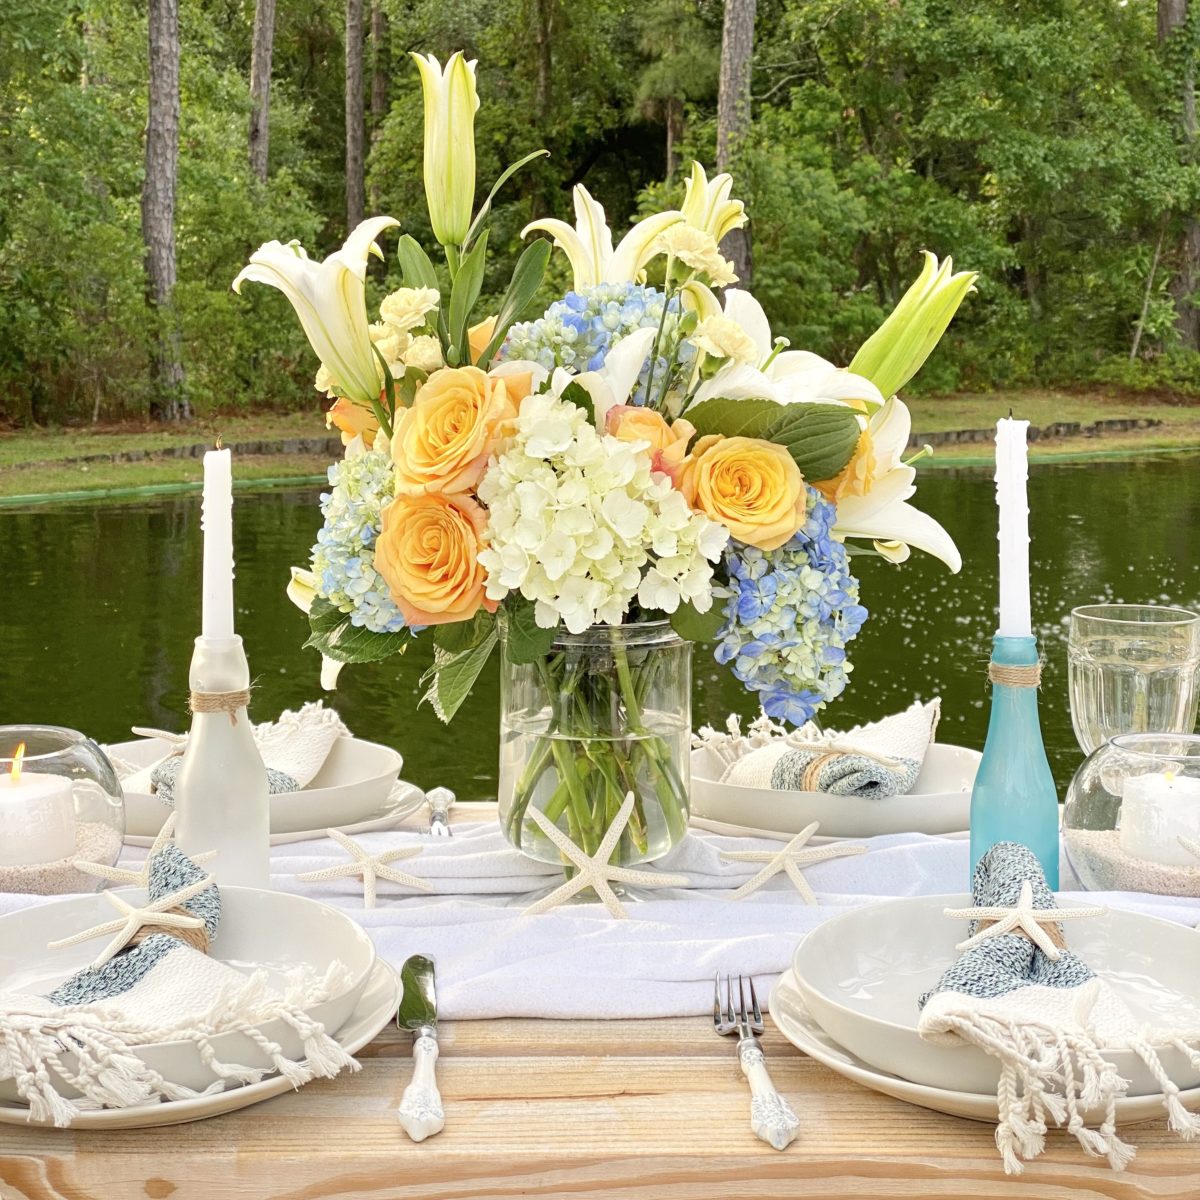 Floral centerpiece and sea glass bottles used as centerpiece.